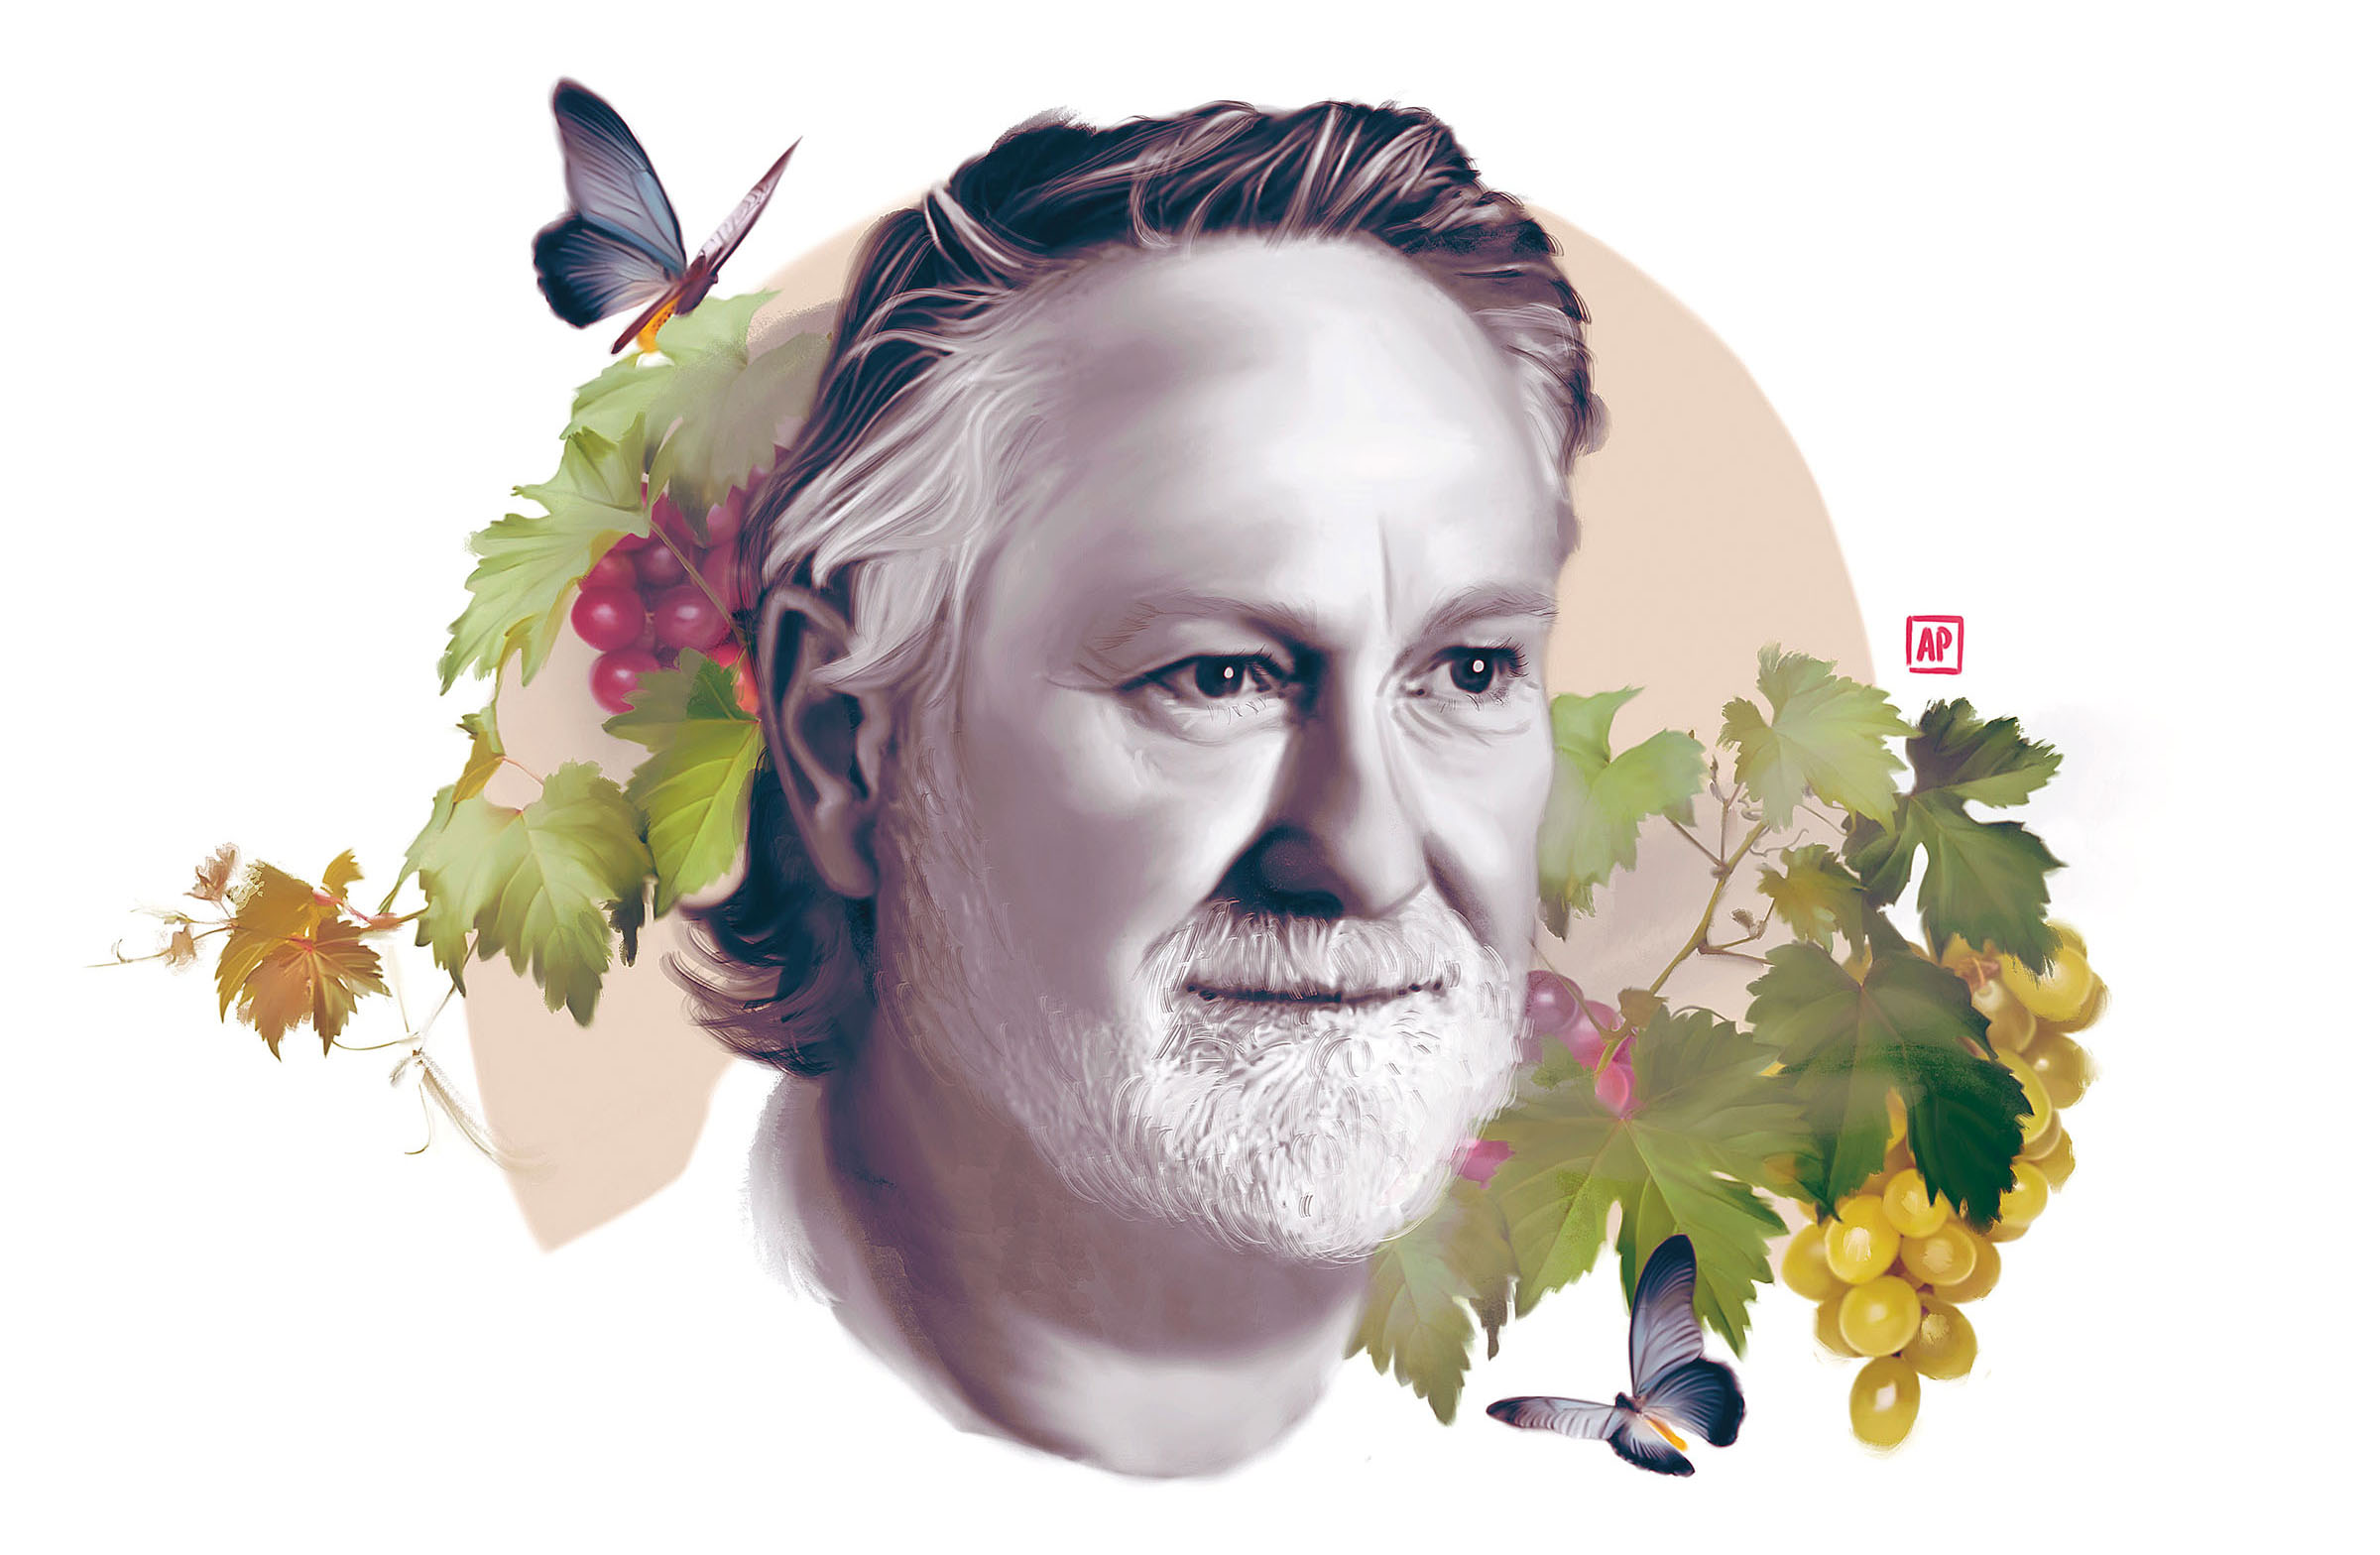 An illustration of a man with a beard surrounded by grapes and butterflies